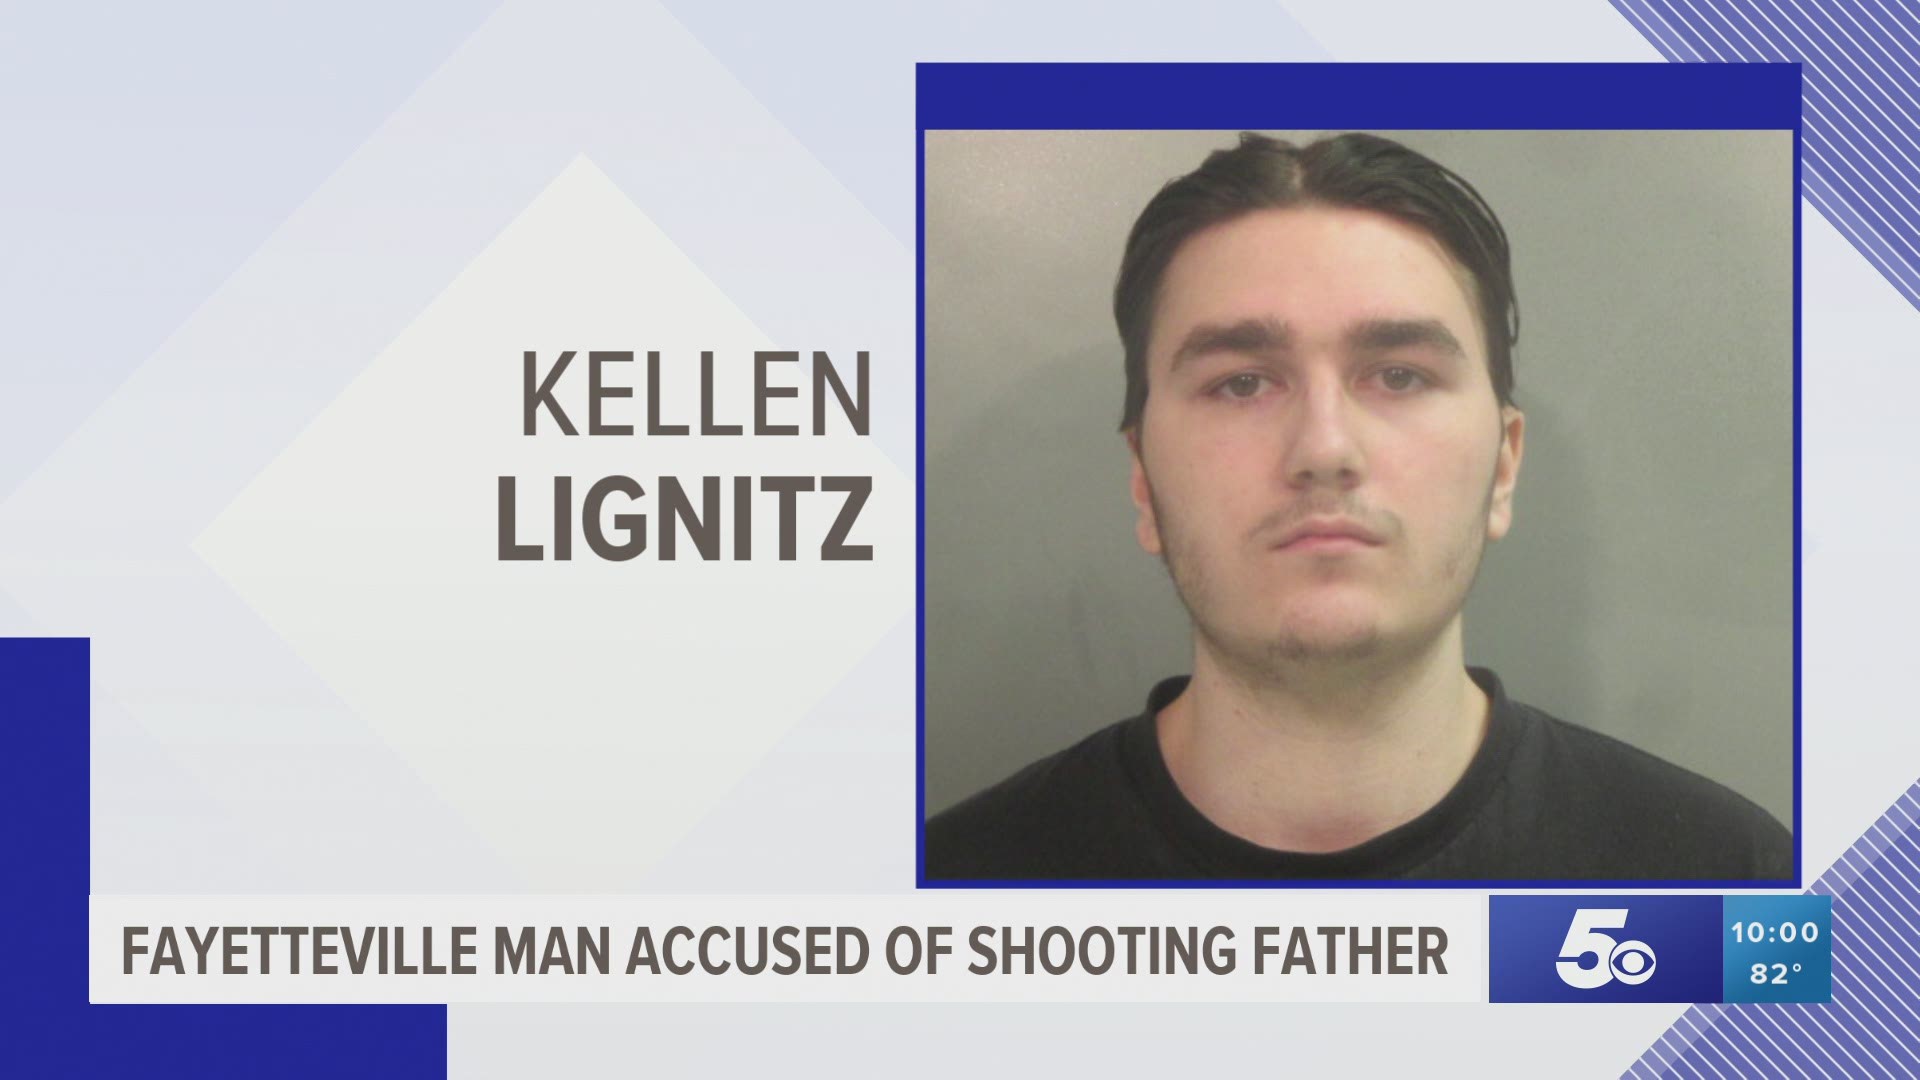 Officers had gone to the home earlier that day for a domestic dispute and say Lignitz locked his father out of the home at gunpoint.